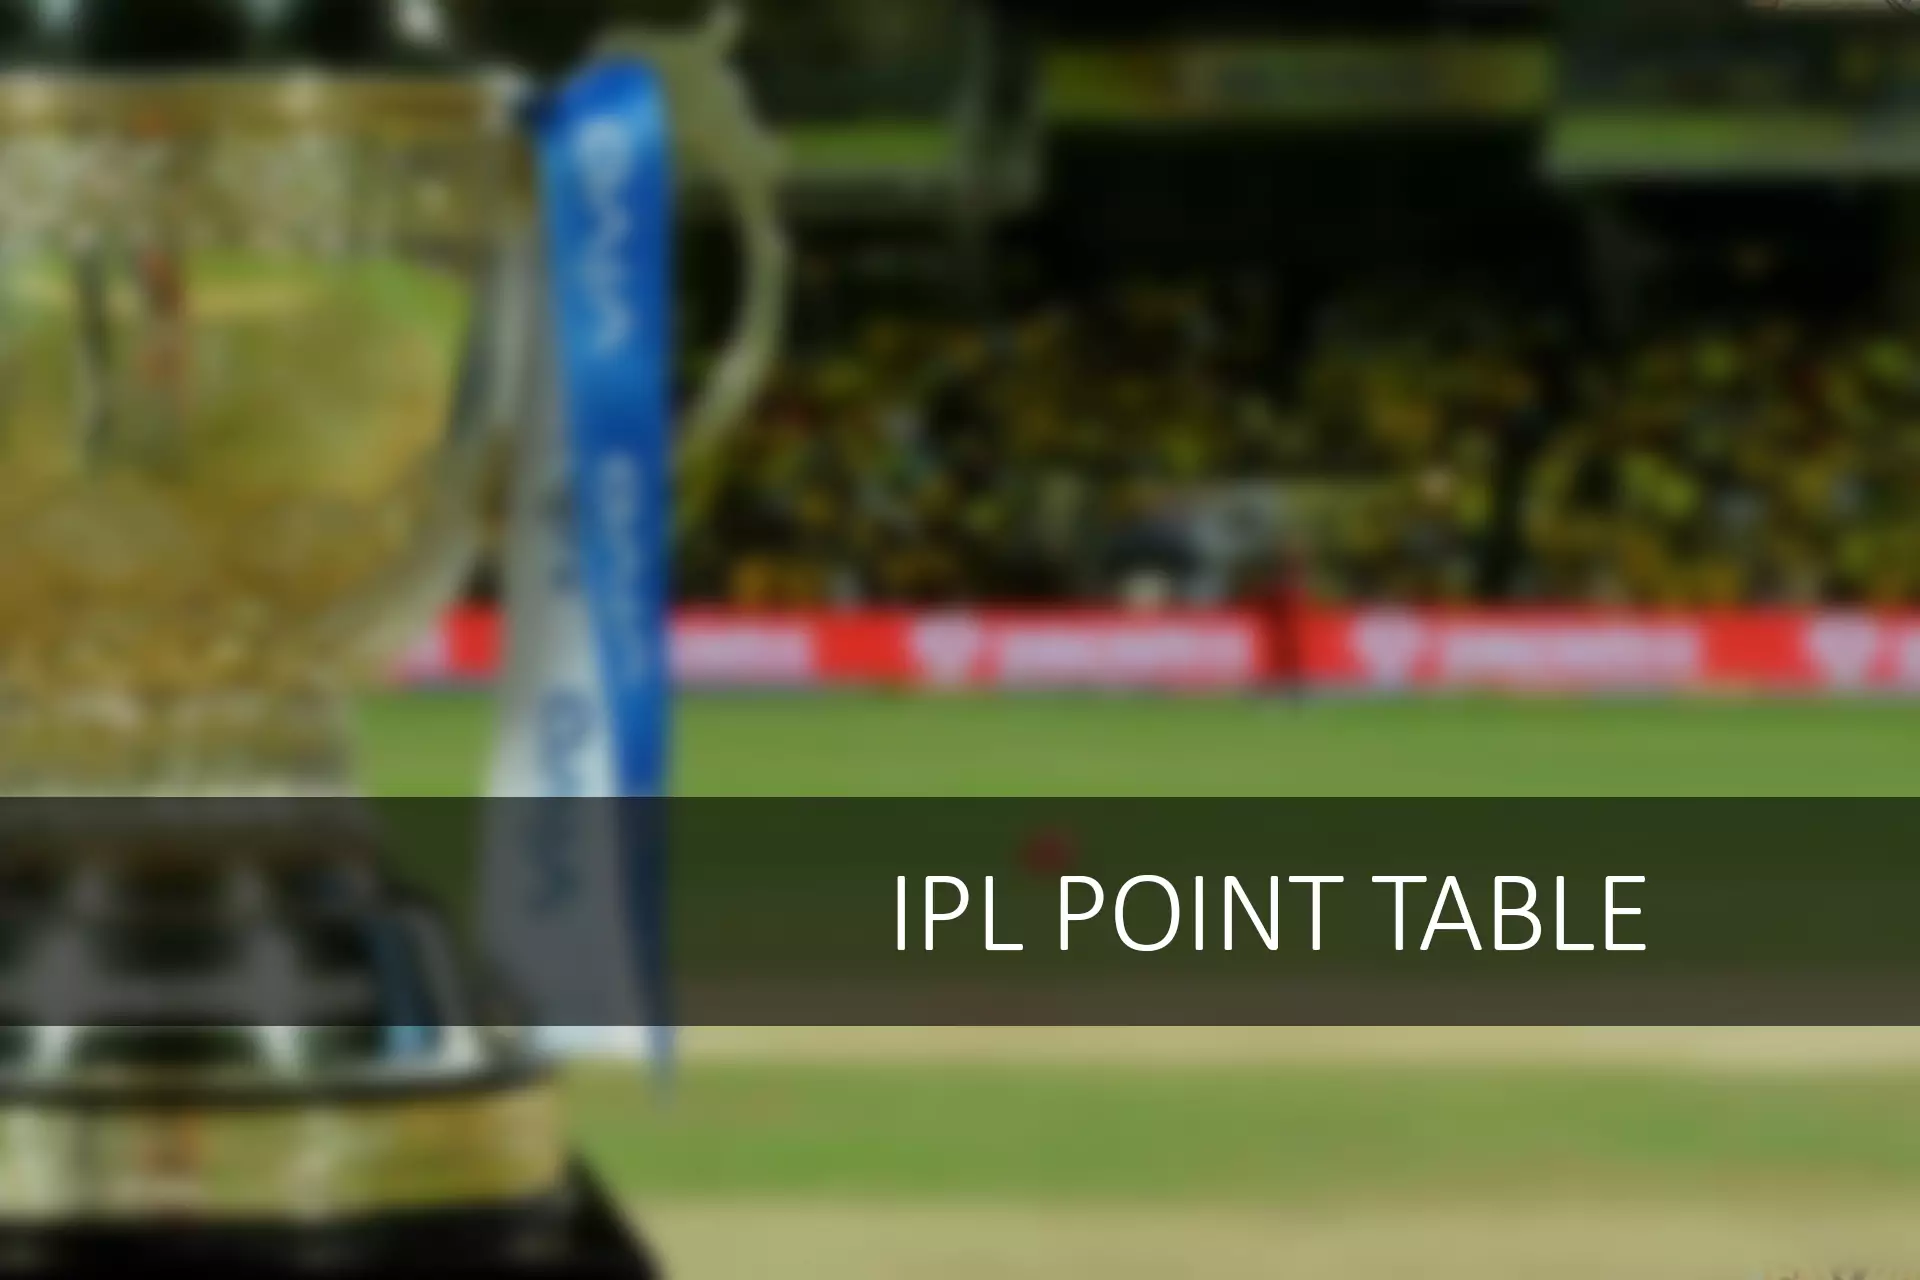 According to the Point Table, the best cricket team on this IPL Cup is Delhi Capitals